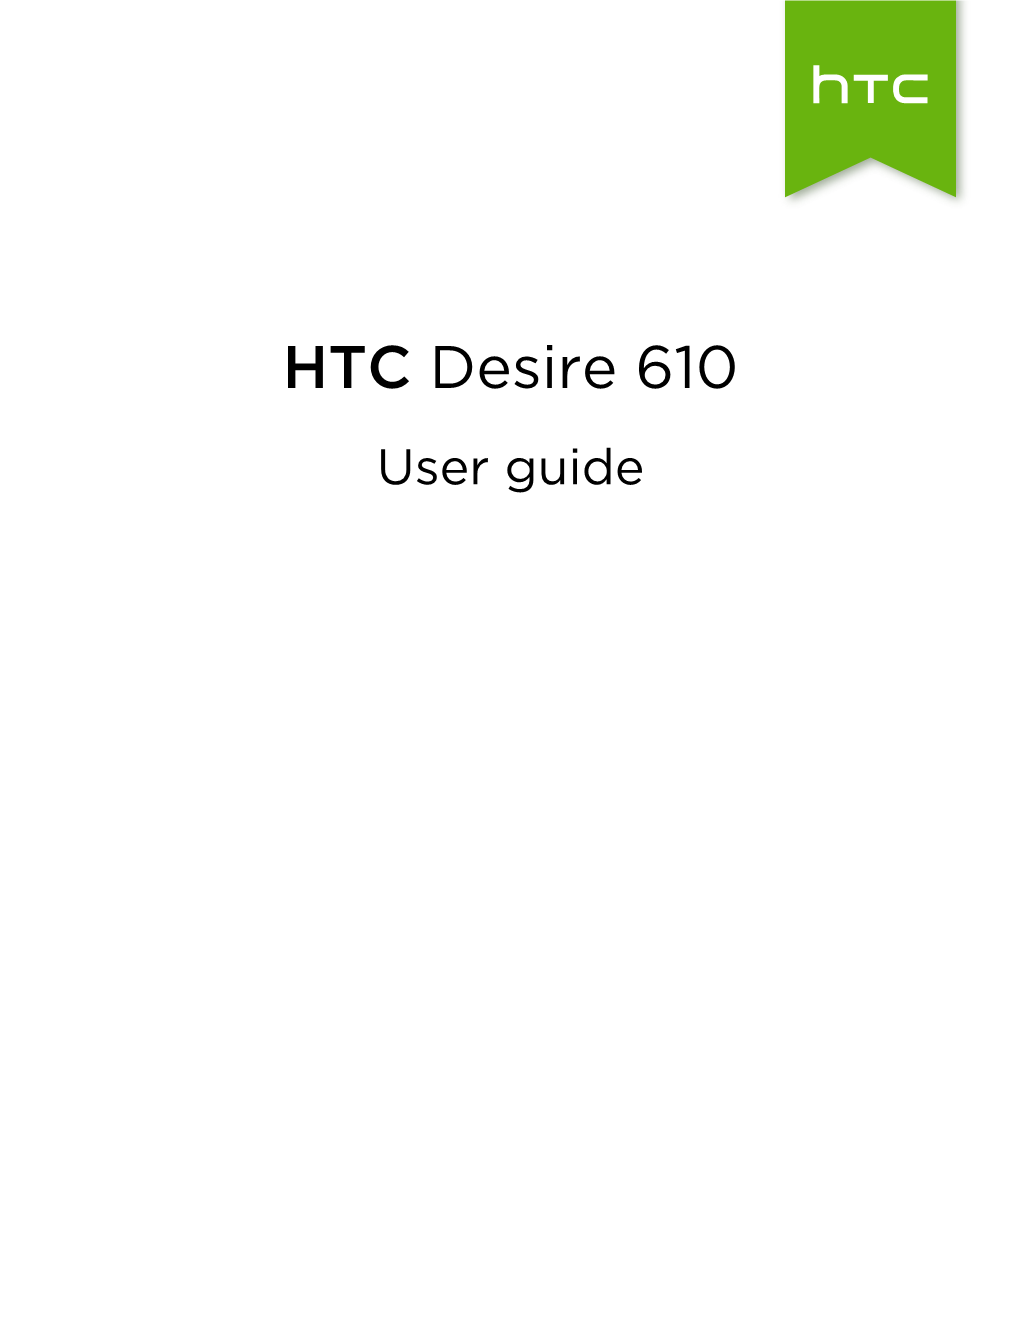 HTC Desire 610 User Guide 2 Contents Contents